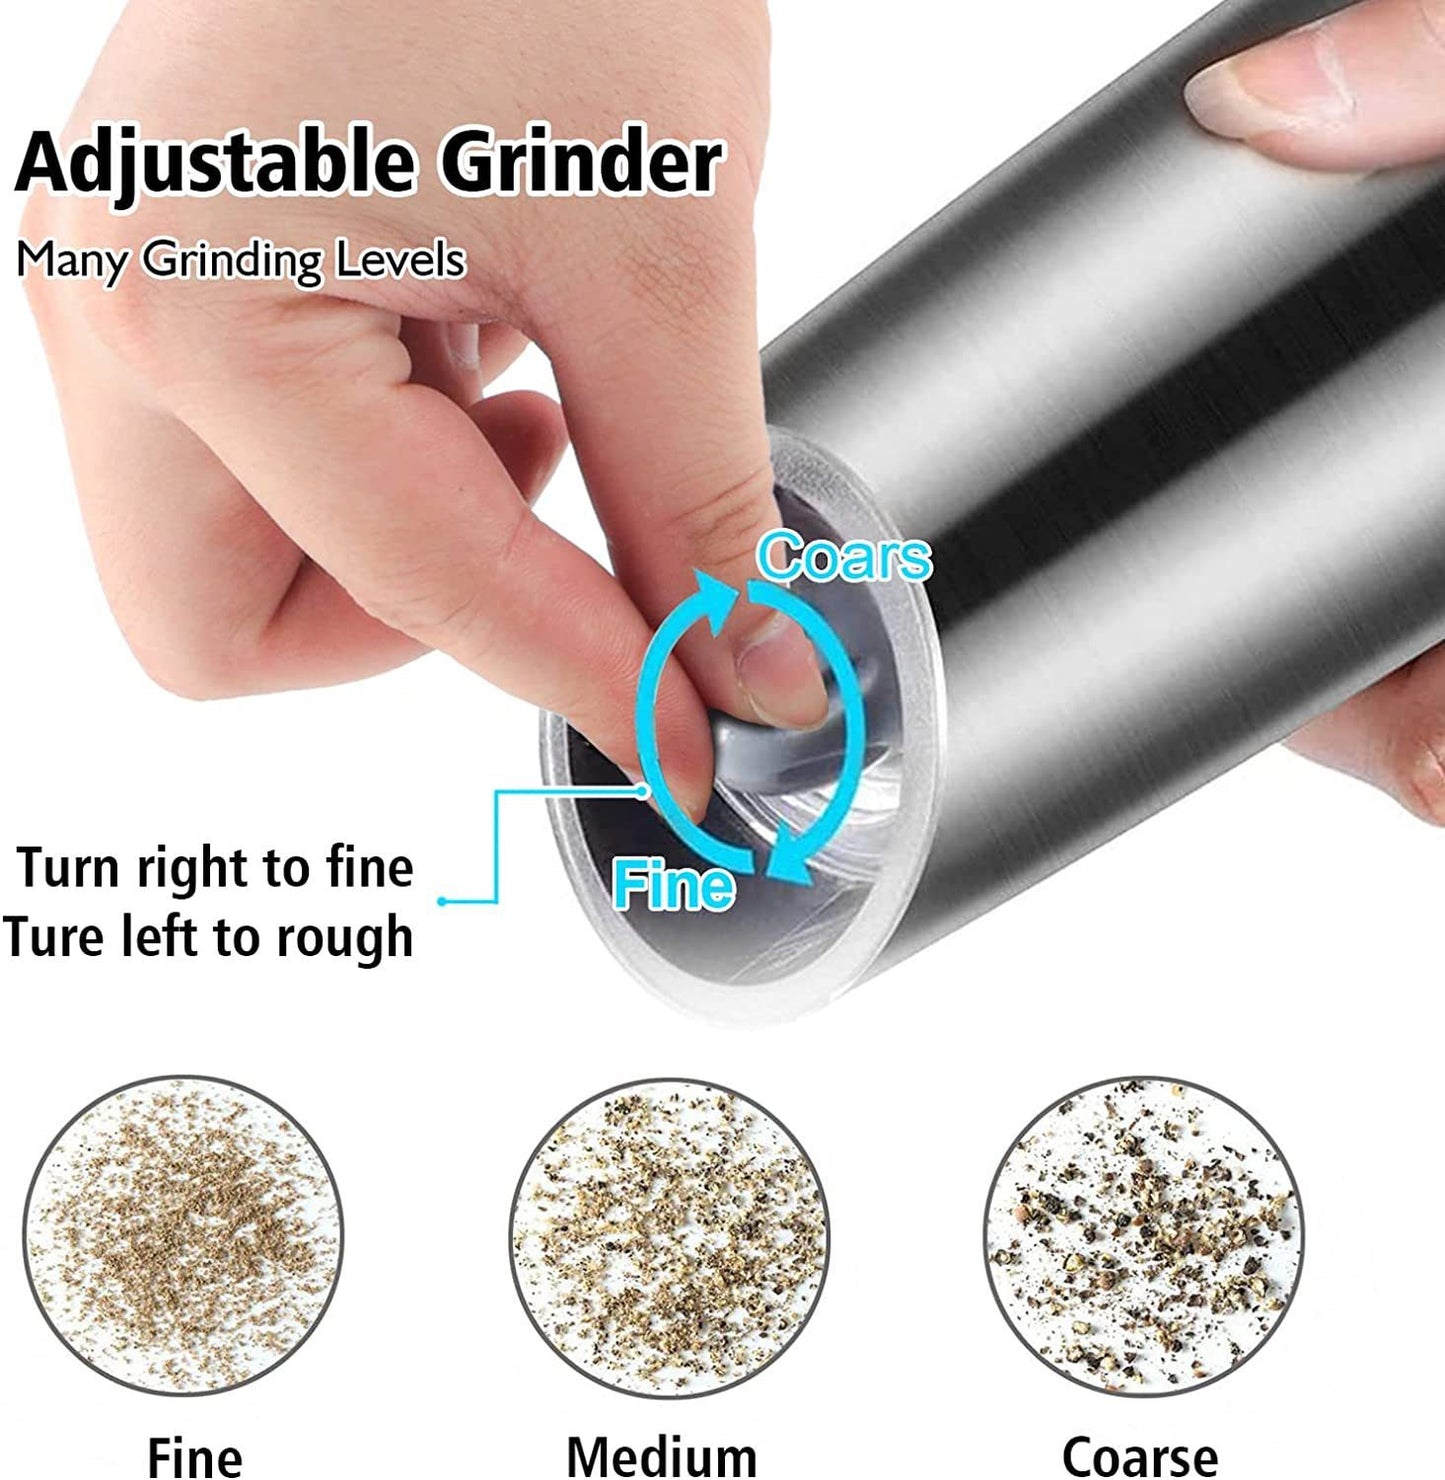 Gravity Electric Pepper and Salt Grinder Set; Adjustable Coarseness; Battery Powered with LED Light; One Hand Automatic Operation; Stainless Steel Black;  2 Pack